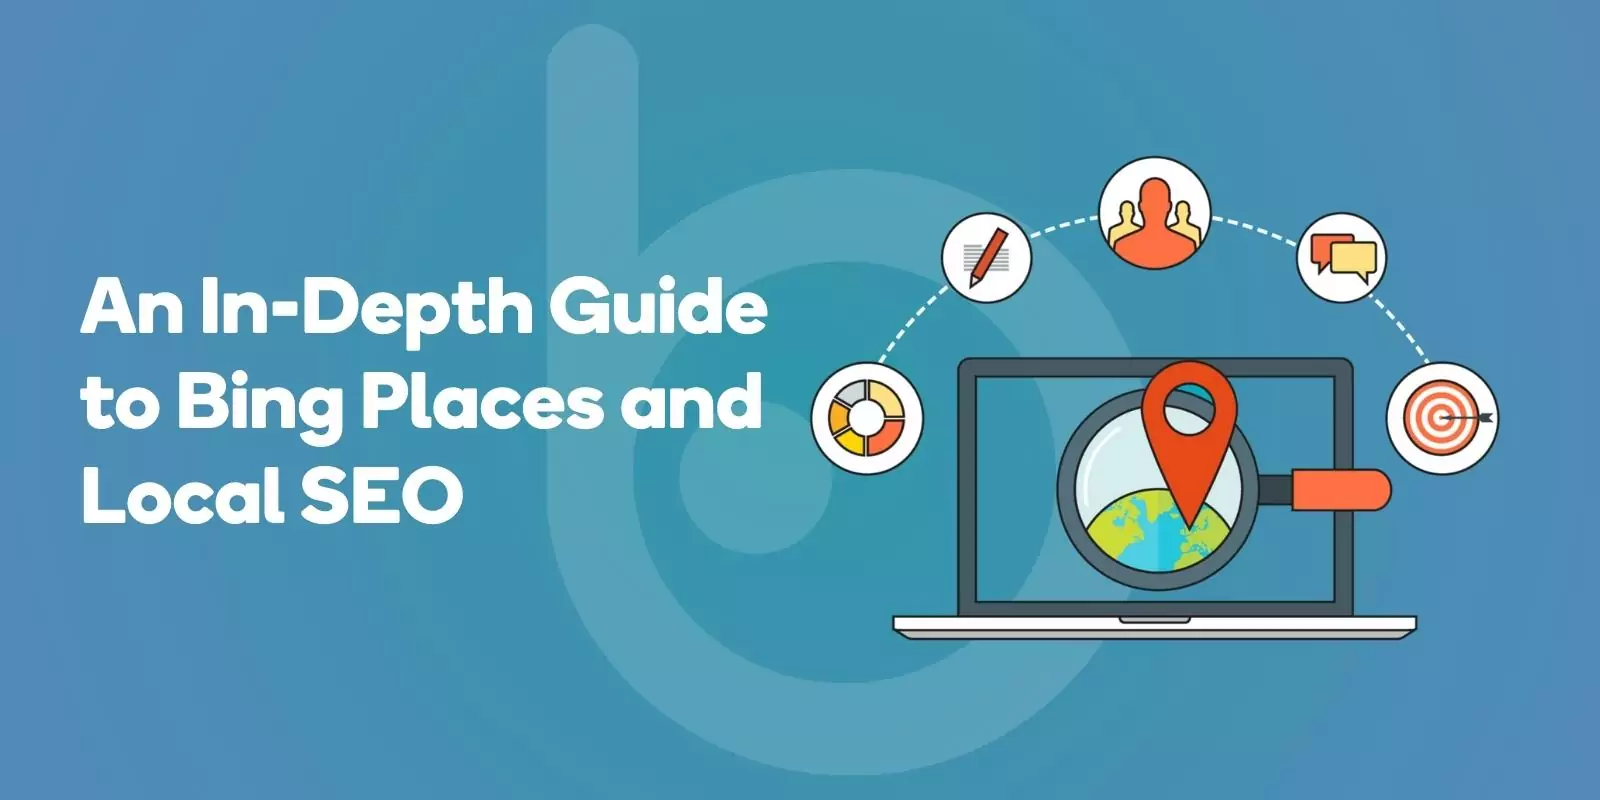 An In-Depth Guide to Bing Places and Local SEO: What You Need to Know